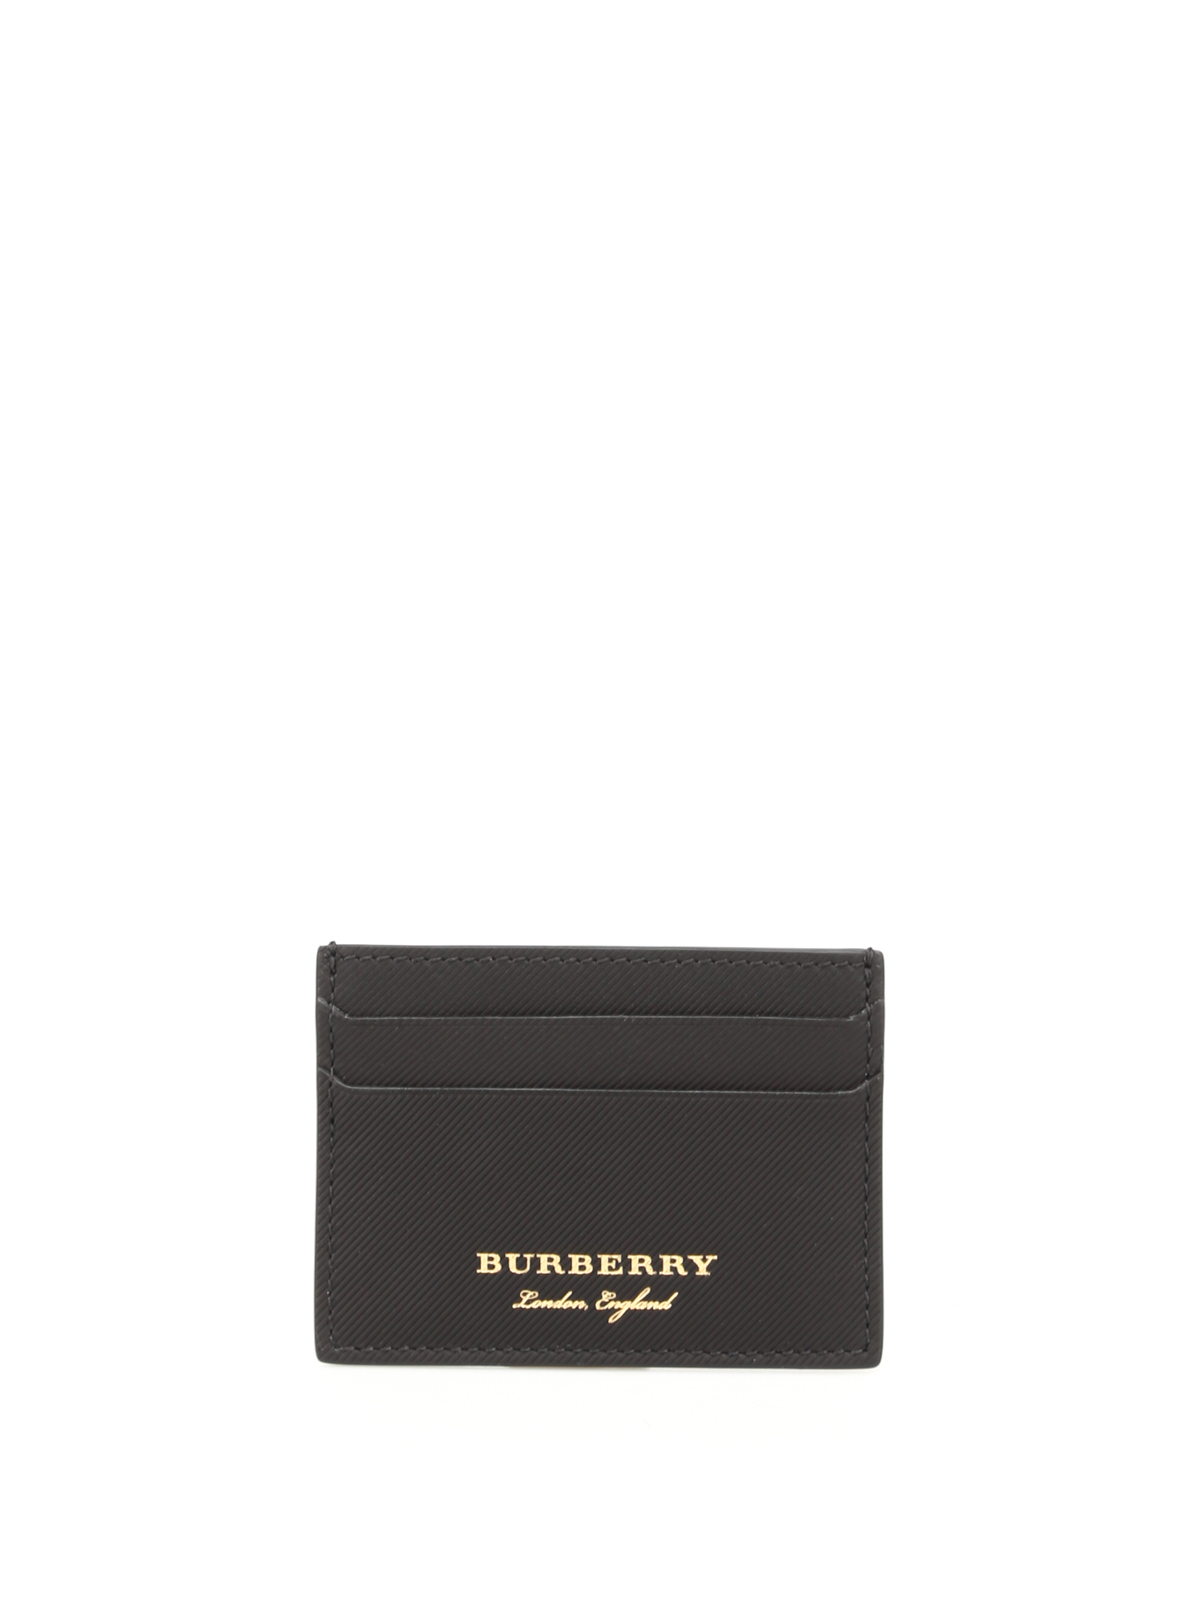 Burberry - Trench leather card holder 